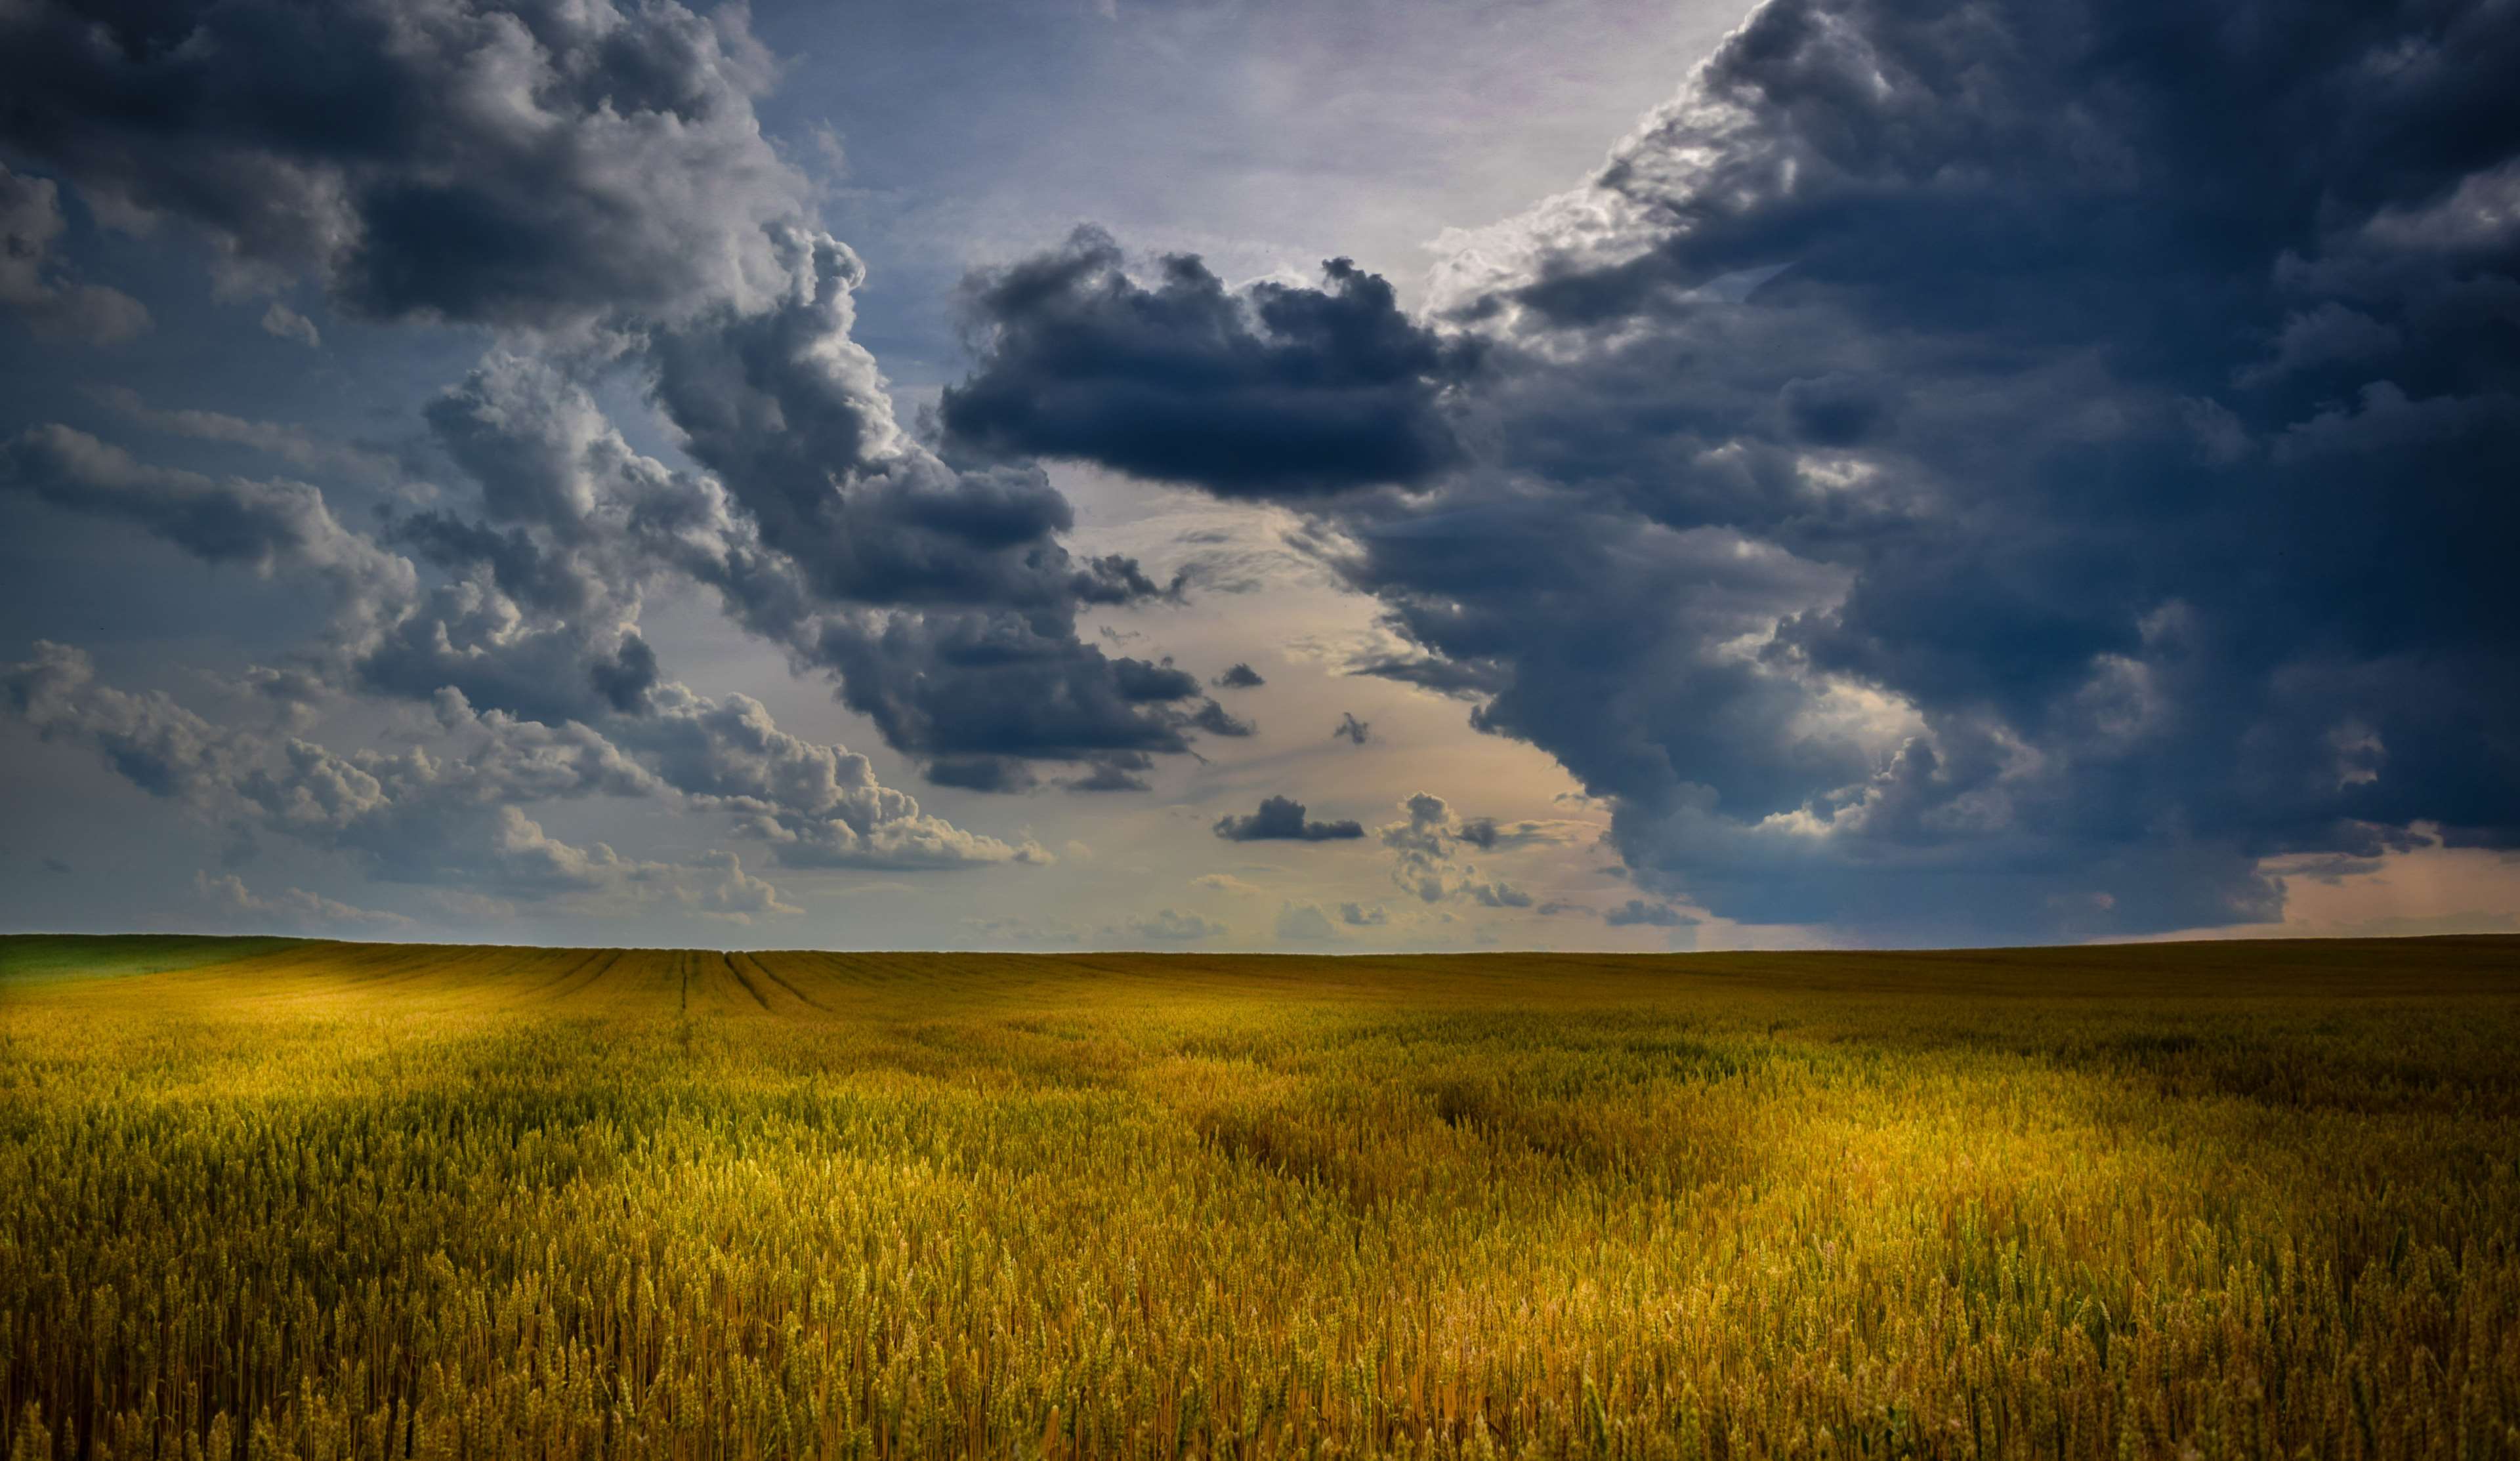 3840x2227-3072793-agriculture_cloudscape_cloudy-skies_countryside_crop_cropland_farm_farming_field_harvest_landscape_light-and-shadow_nature_outdoors_pasture_plains_rural_sky_sunlight_sunset_wheat_yellow